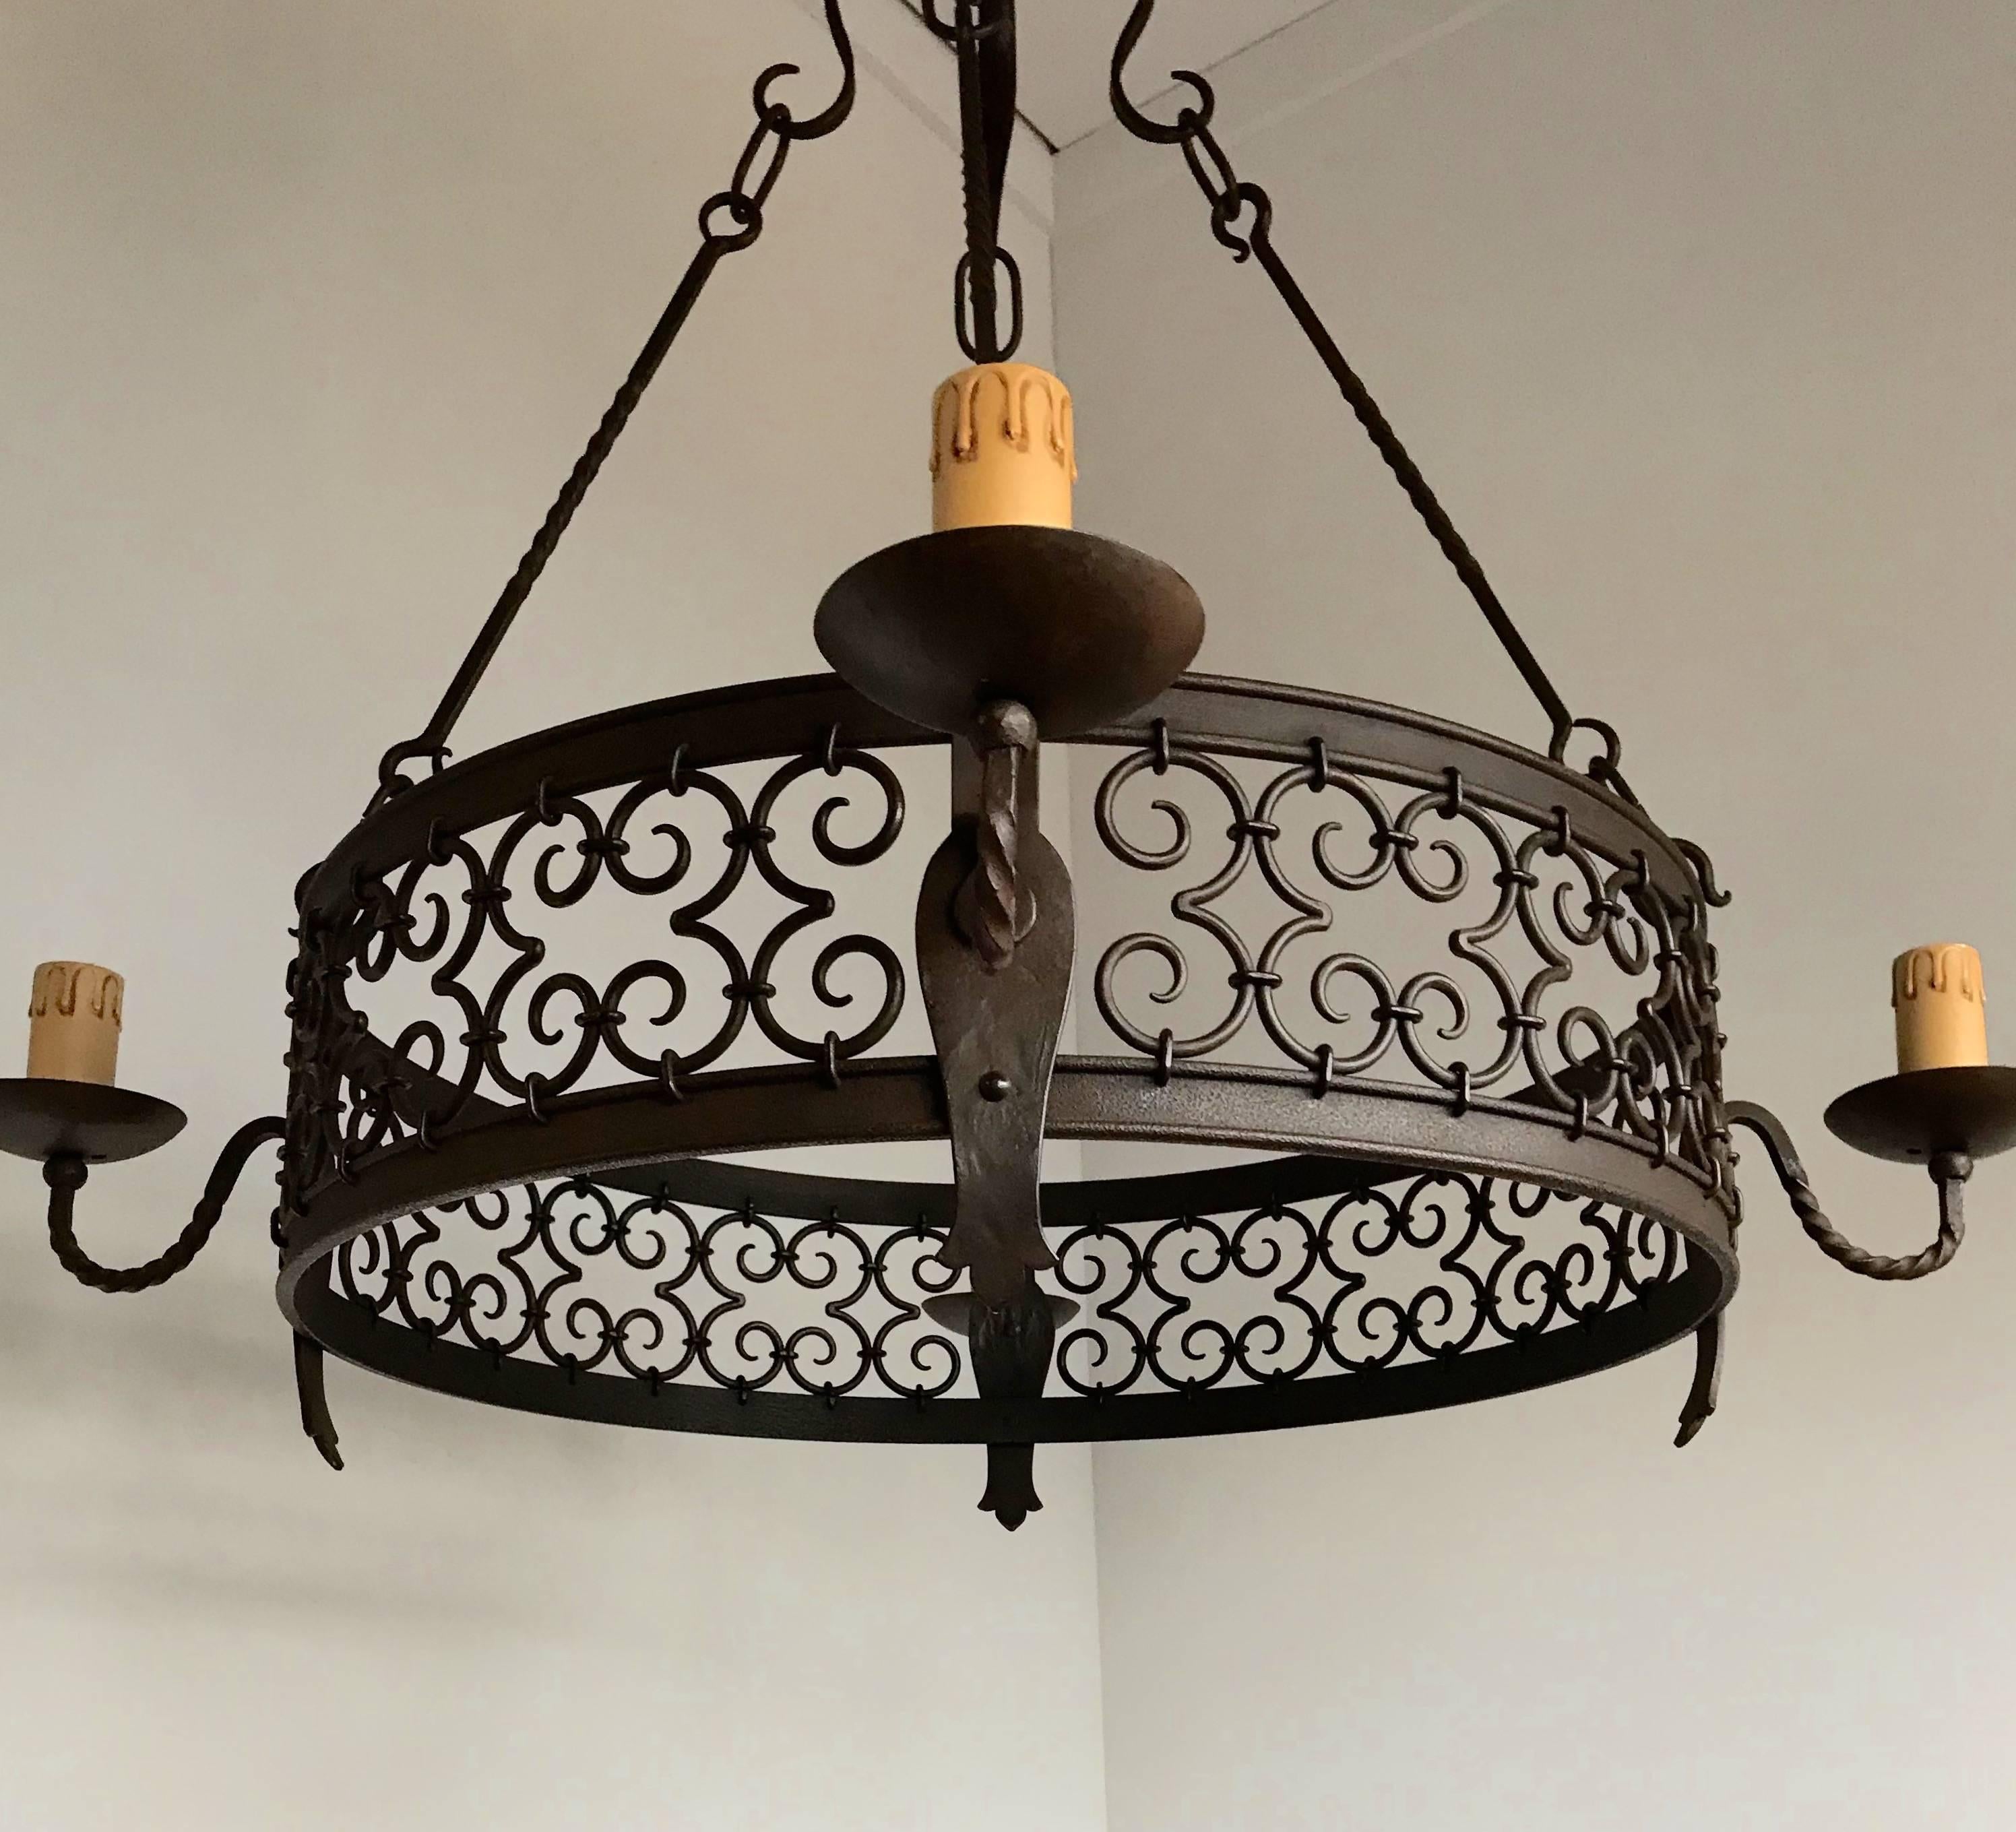 Large Arts & Crafts Forged in Fire Wrought Iron Chandelier Pendant Light Fixture For Sale 2